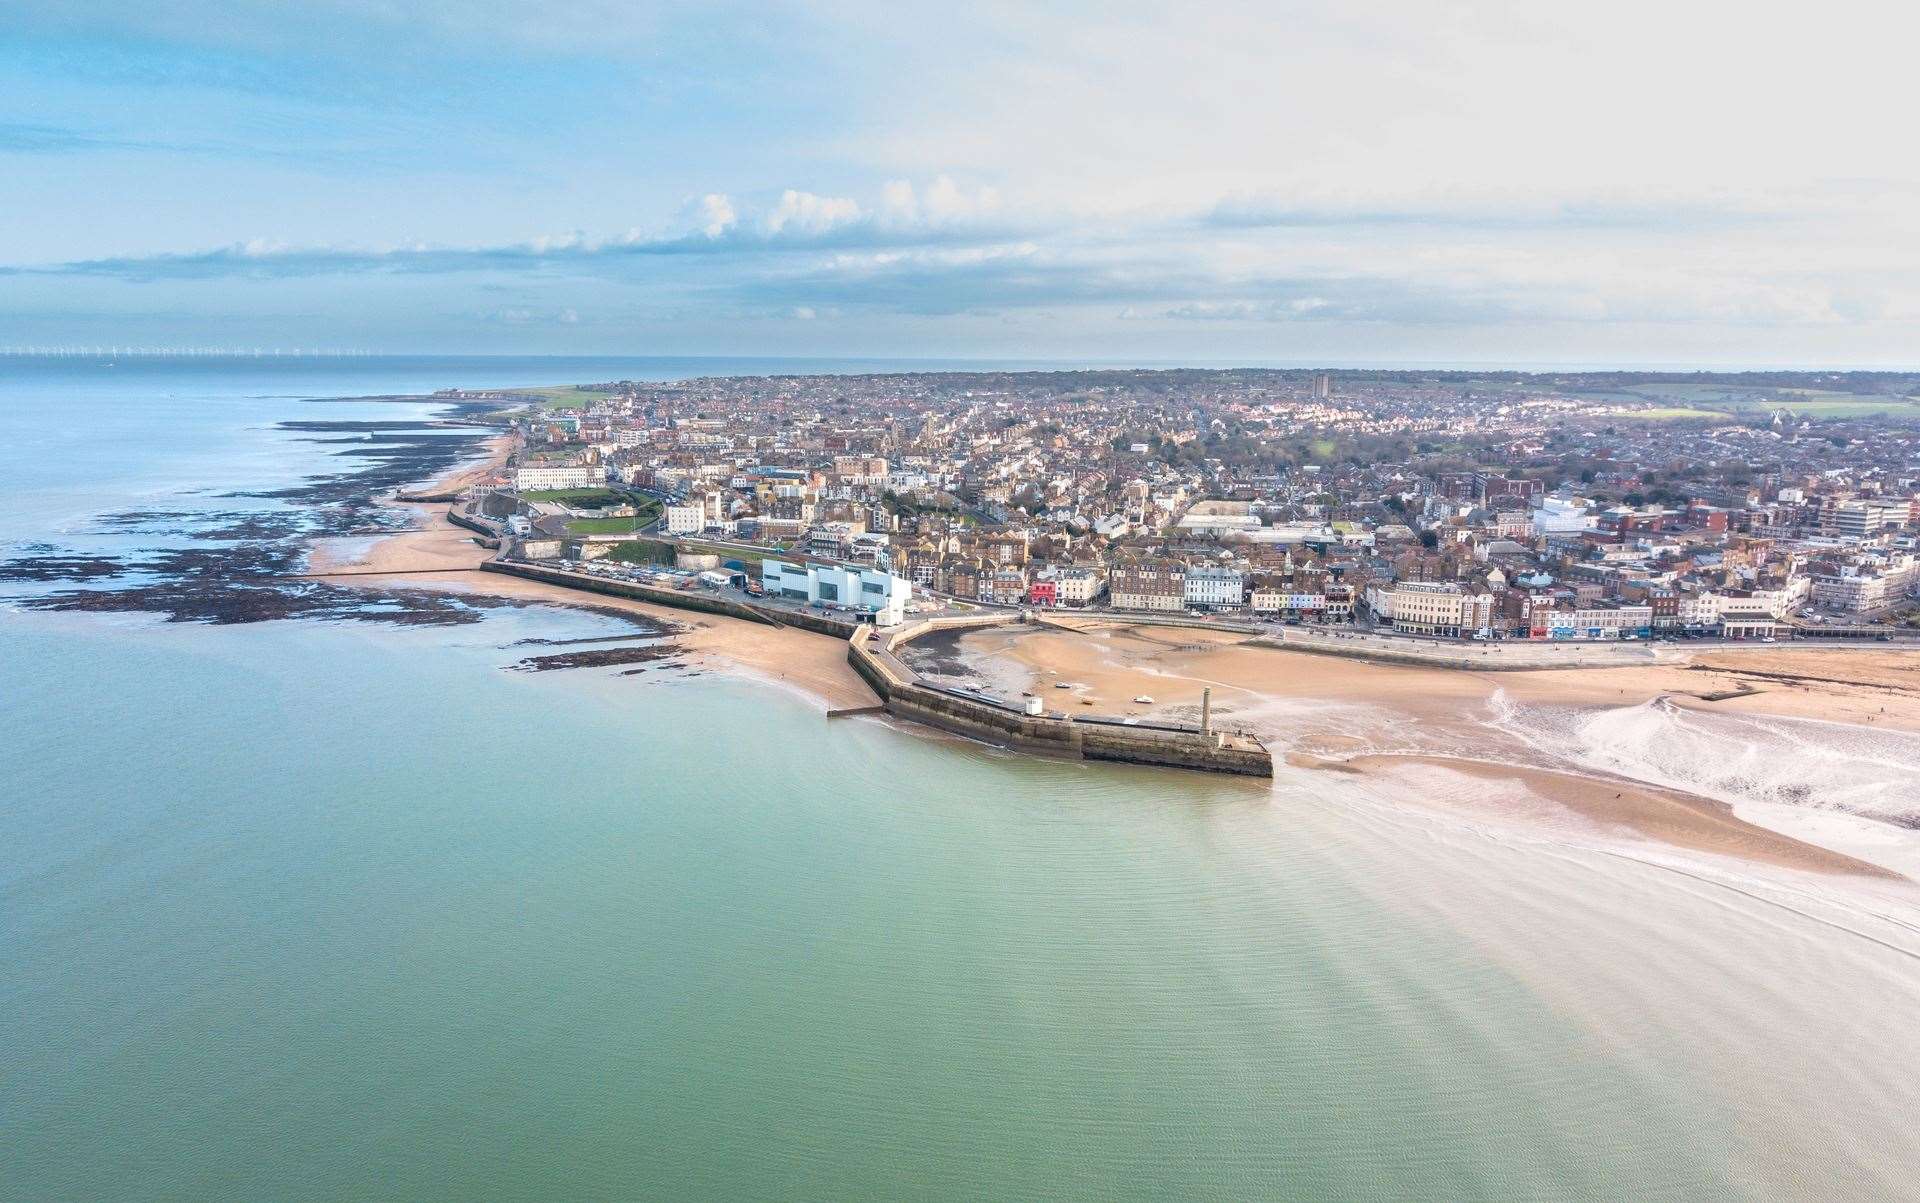 Thanet was the only district not to see a rise in its numbers